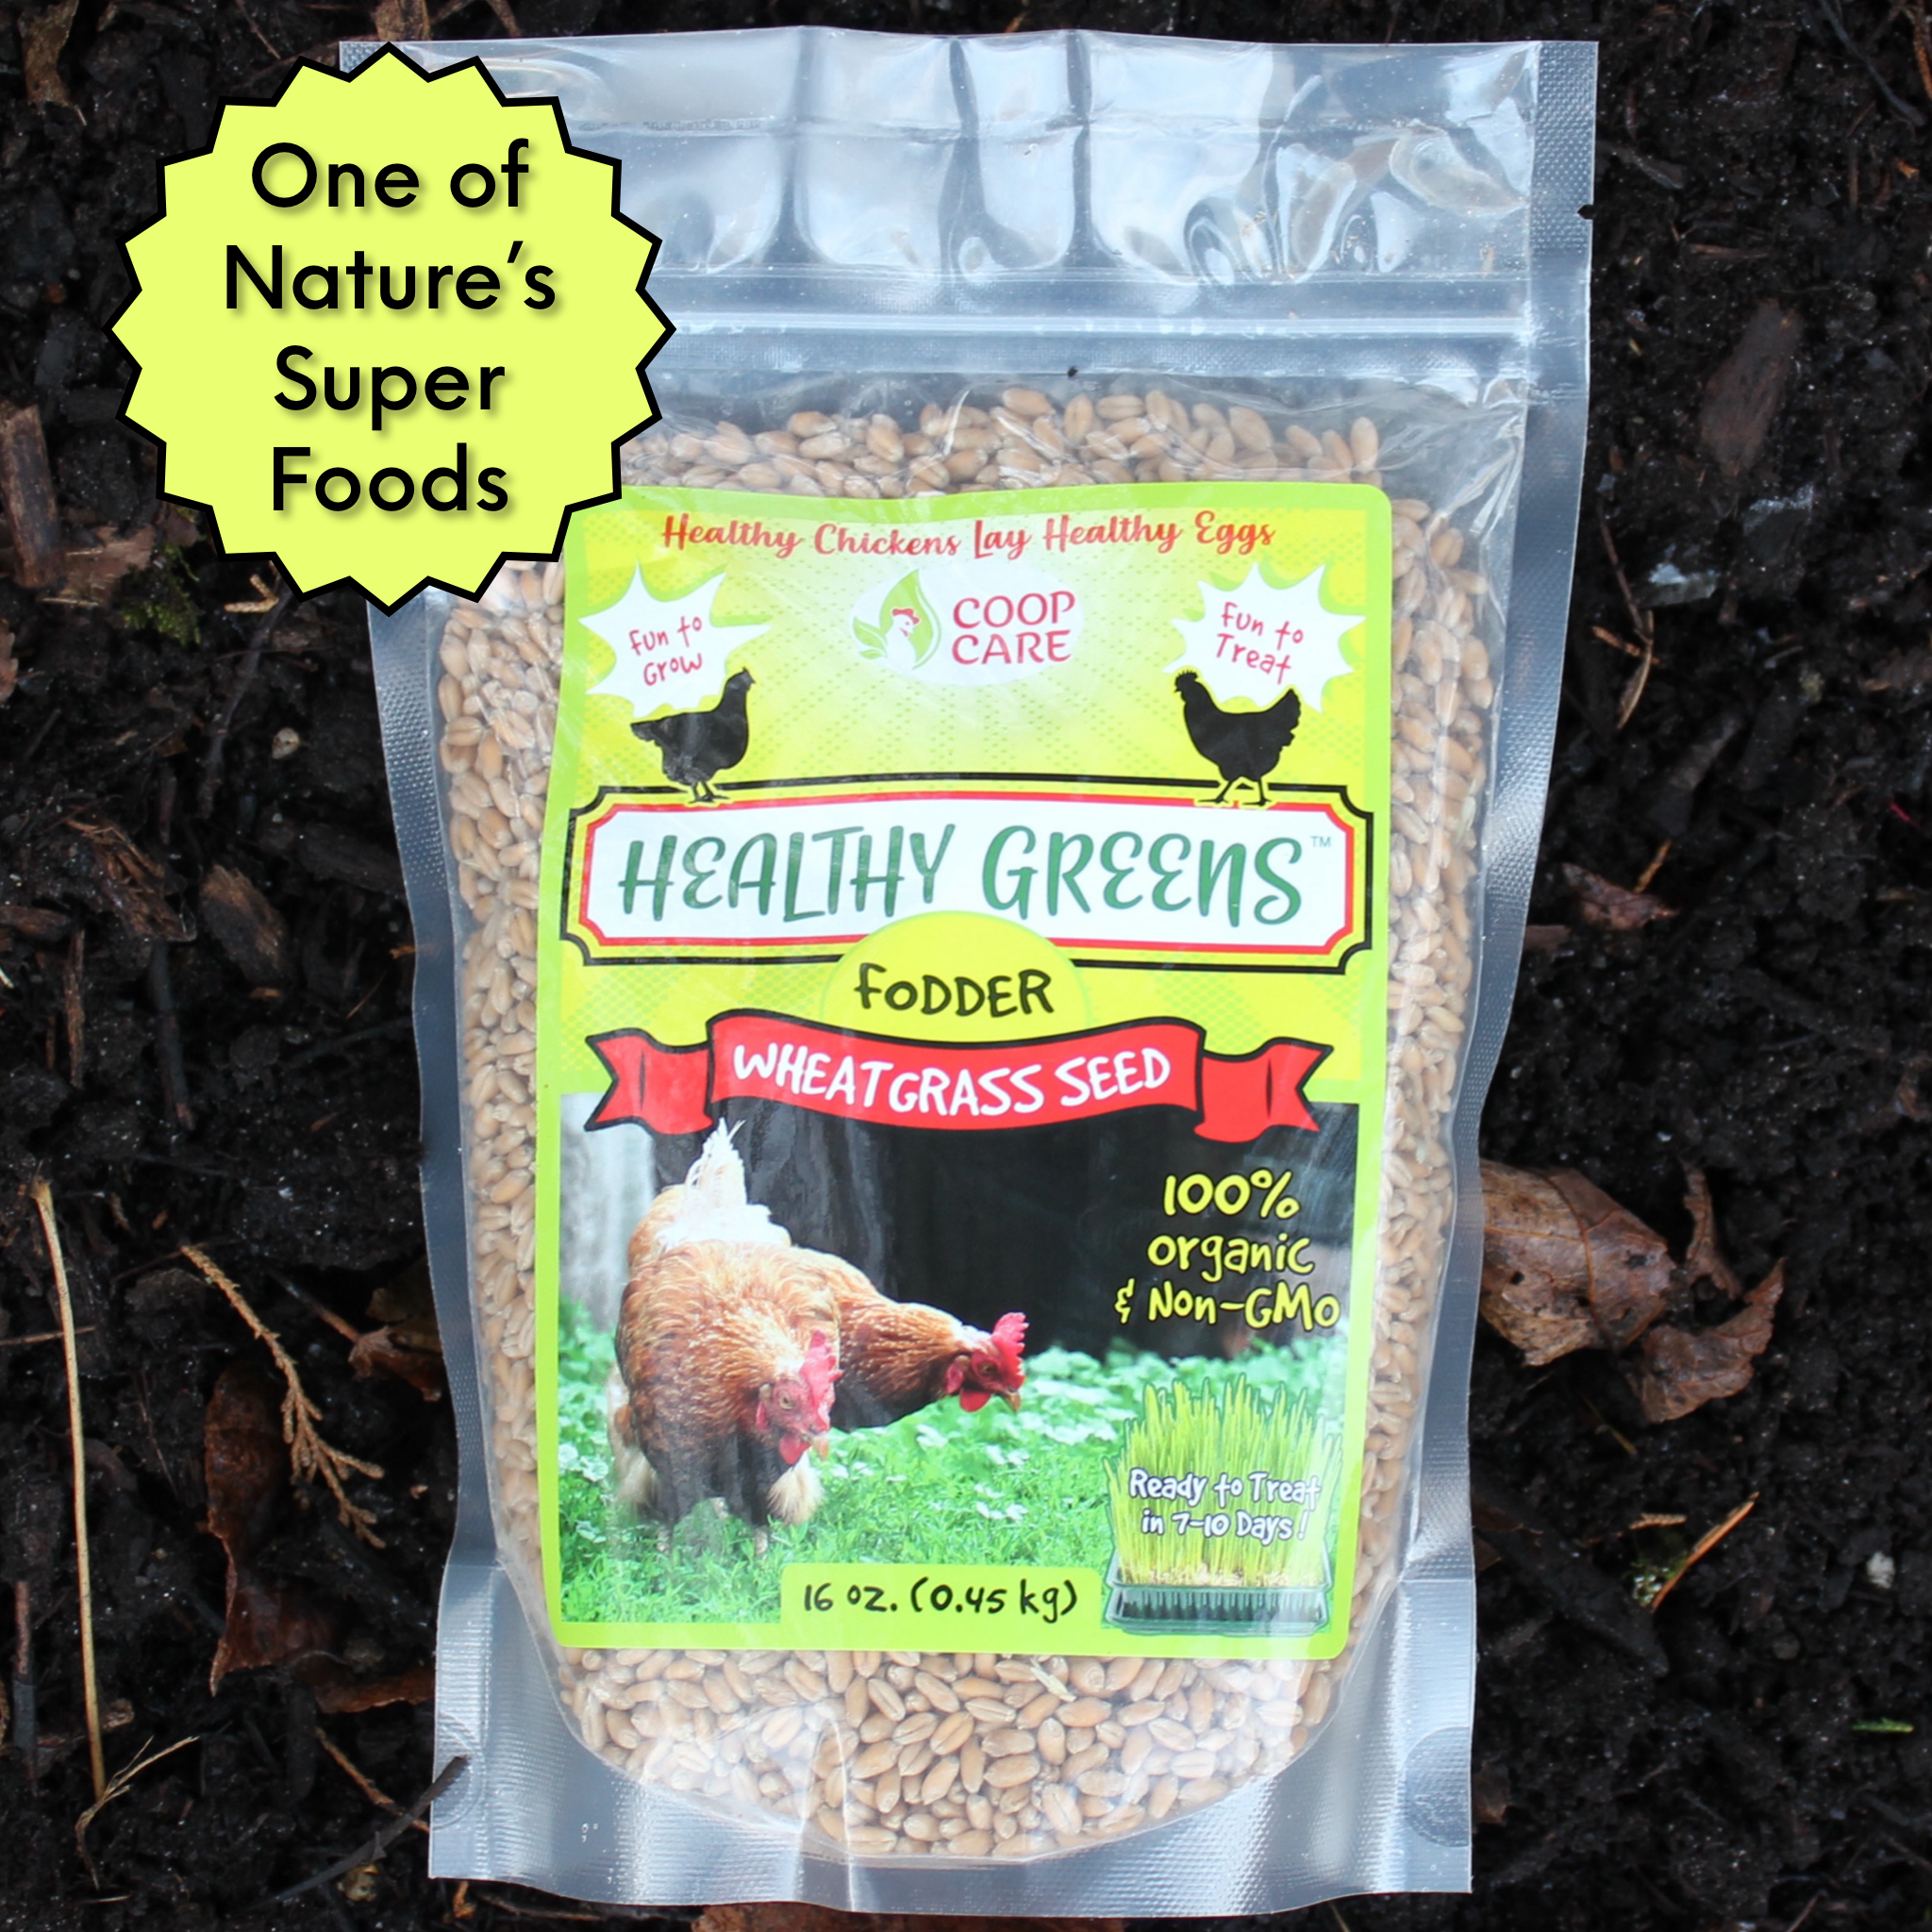 Healthy Greens Wheatgrass Fodder Seed, 1lb Bag. Premium Wheatgrass Seed, Non-GMO for Backyard Chickens, Plant Indoors/Outdoors. Also Ideal for Cats